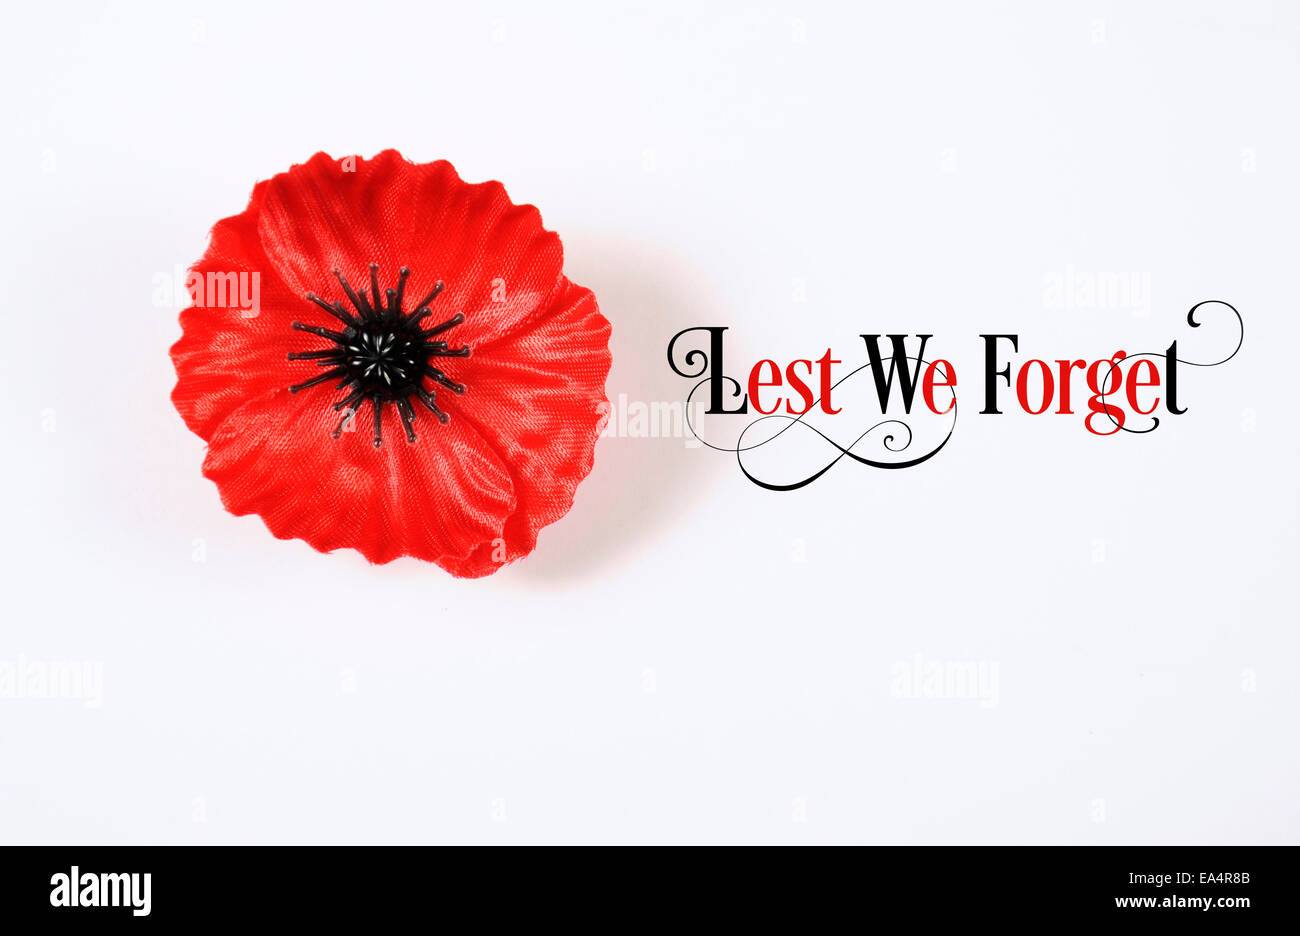 Lest We Forget, Red Flanders Poppy Lapel Pin Badge for November 11, Remembrance Day appeal. Stock Photo